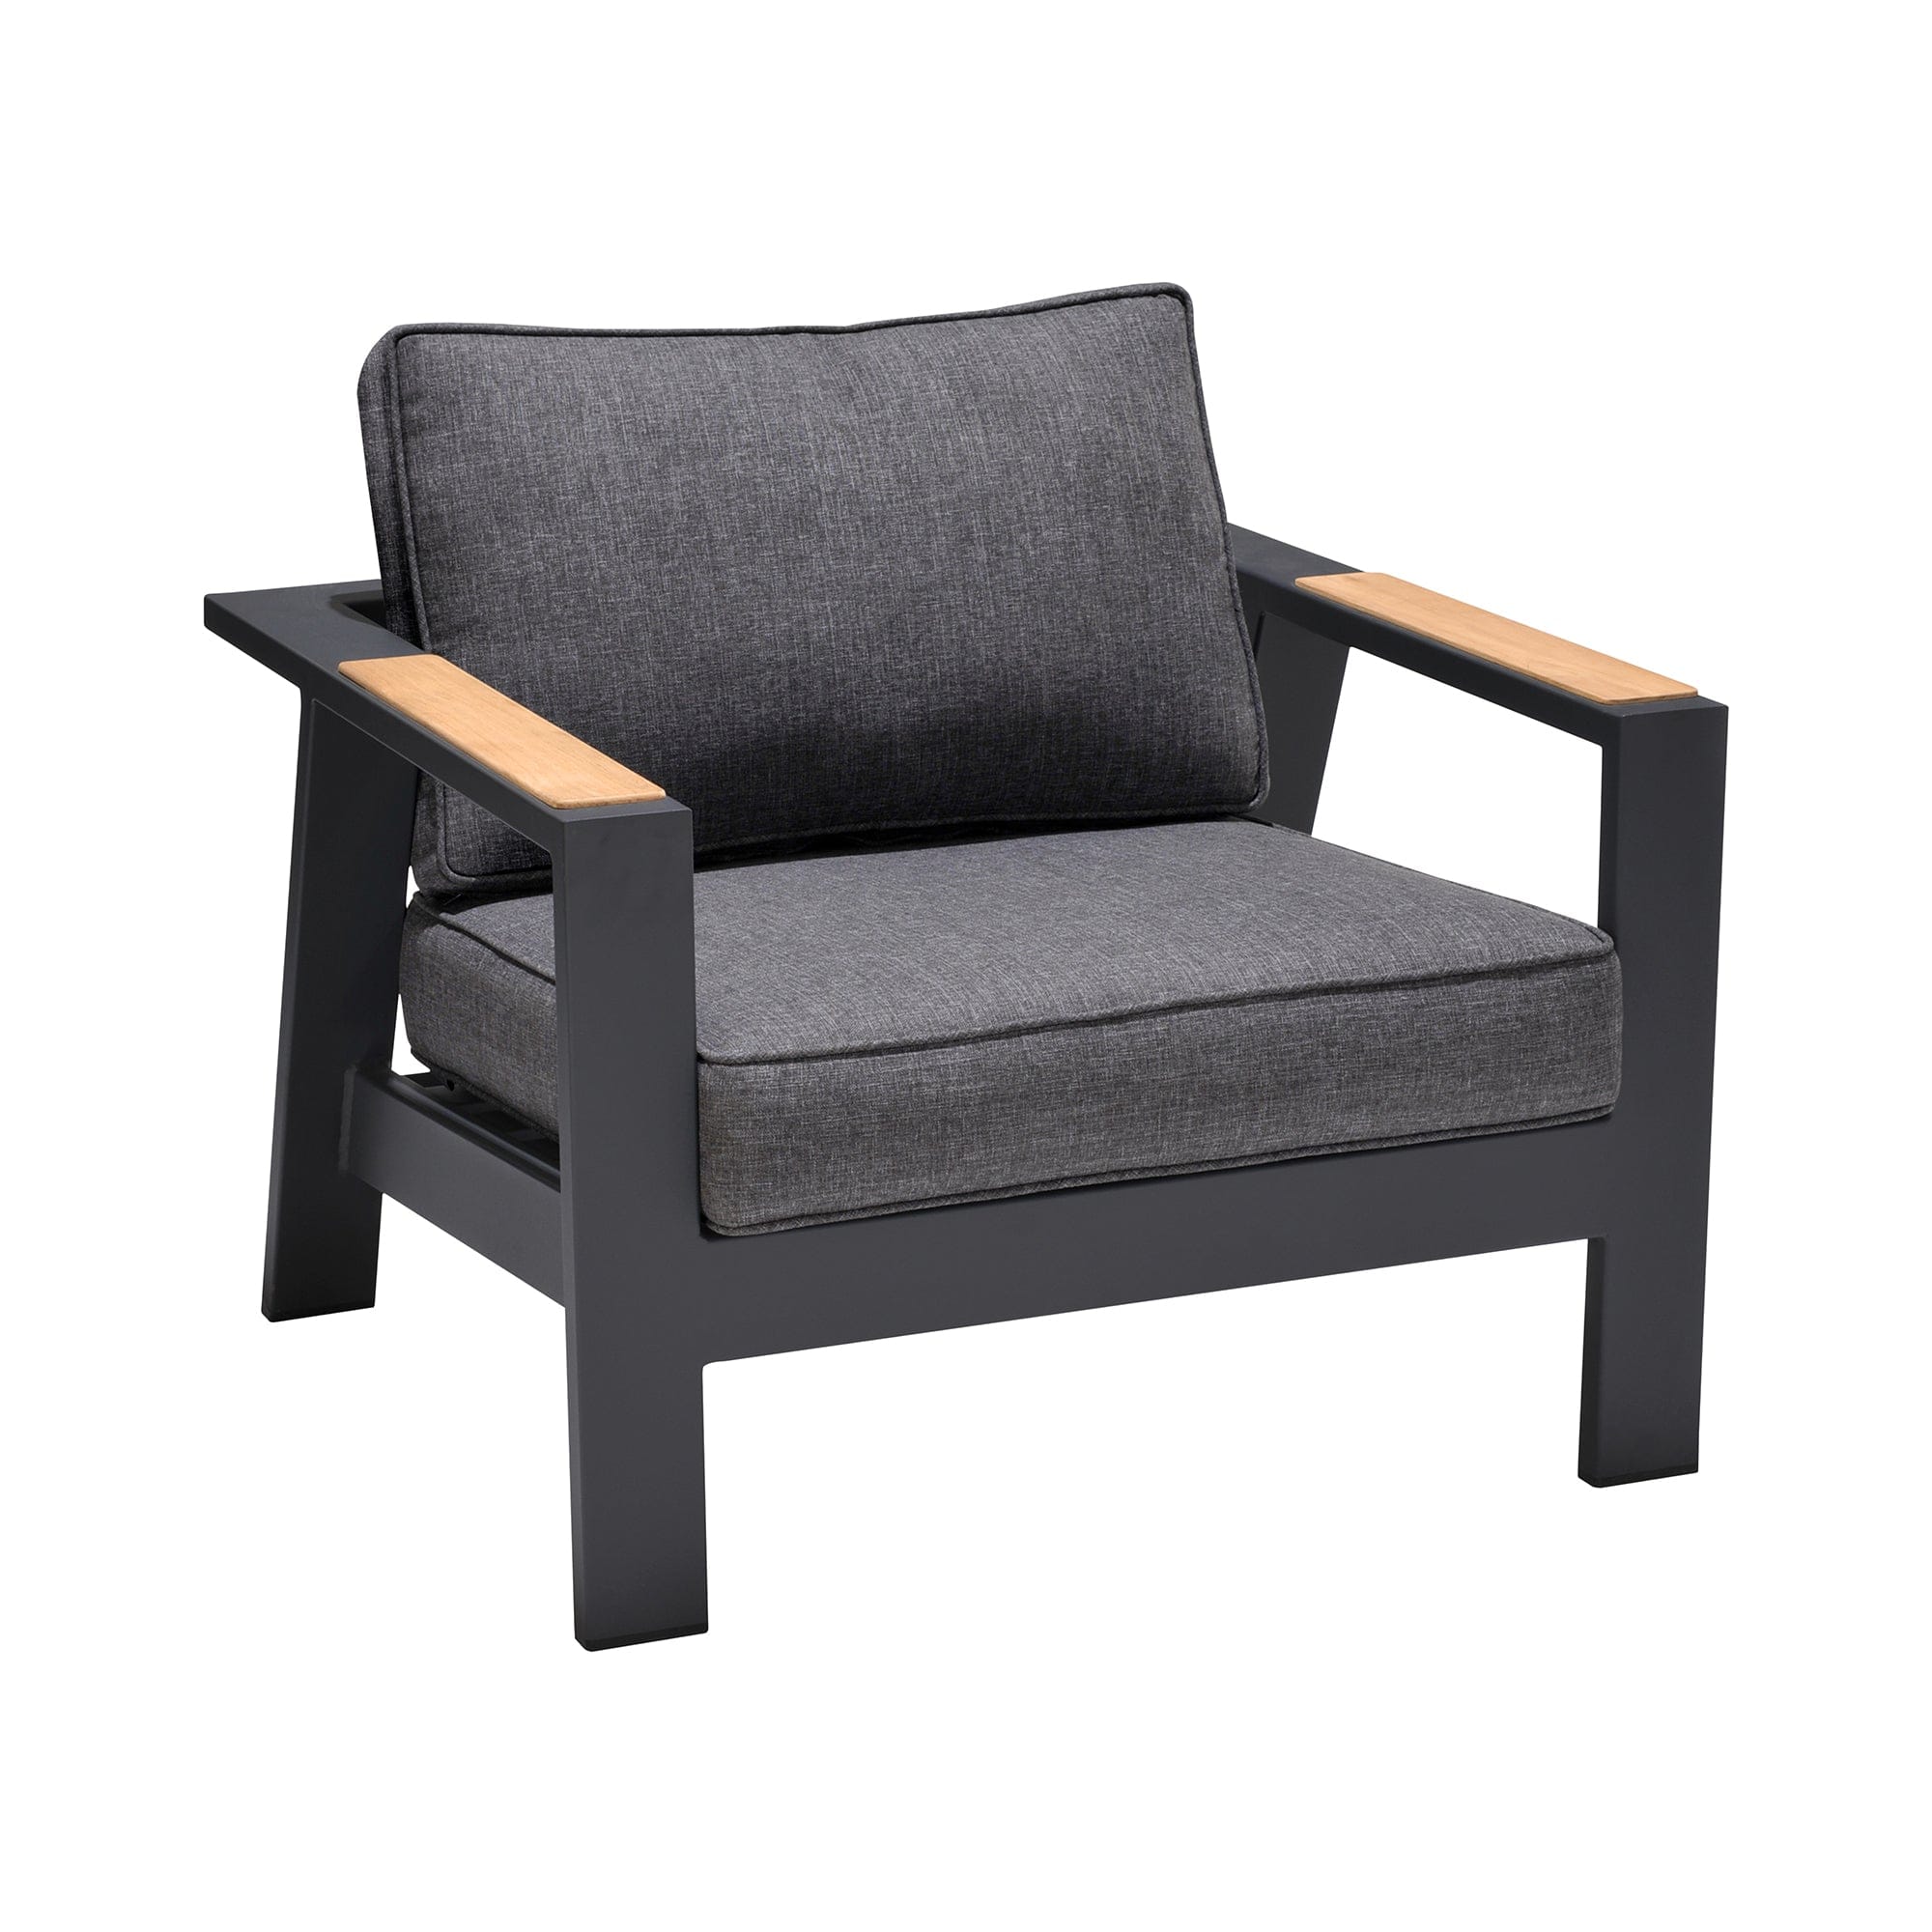 Armen Living Outdoor Sofa Armen Living | Palau Outdoor Chair in Dark Grey with Natural Teak Wood Accent and Cushions | LCPACHGR